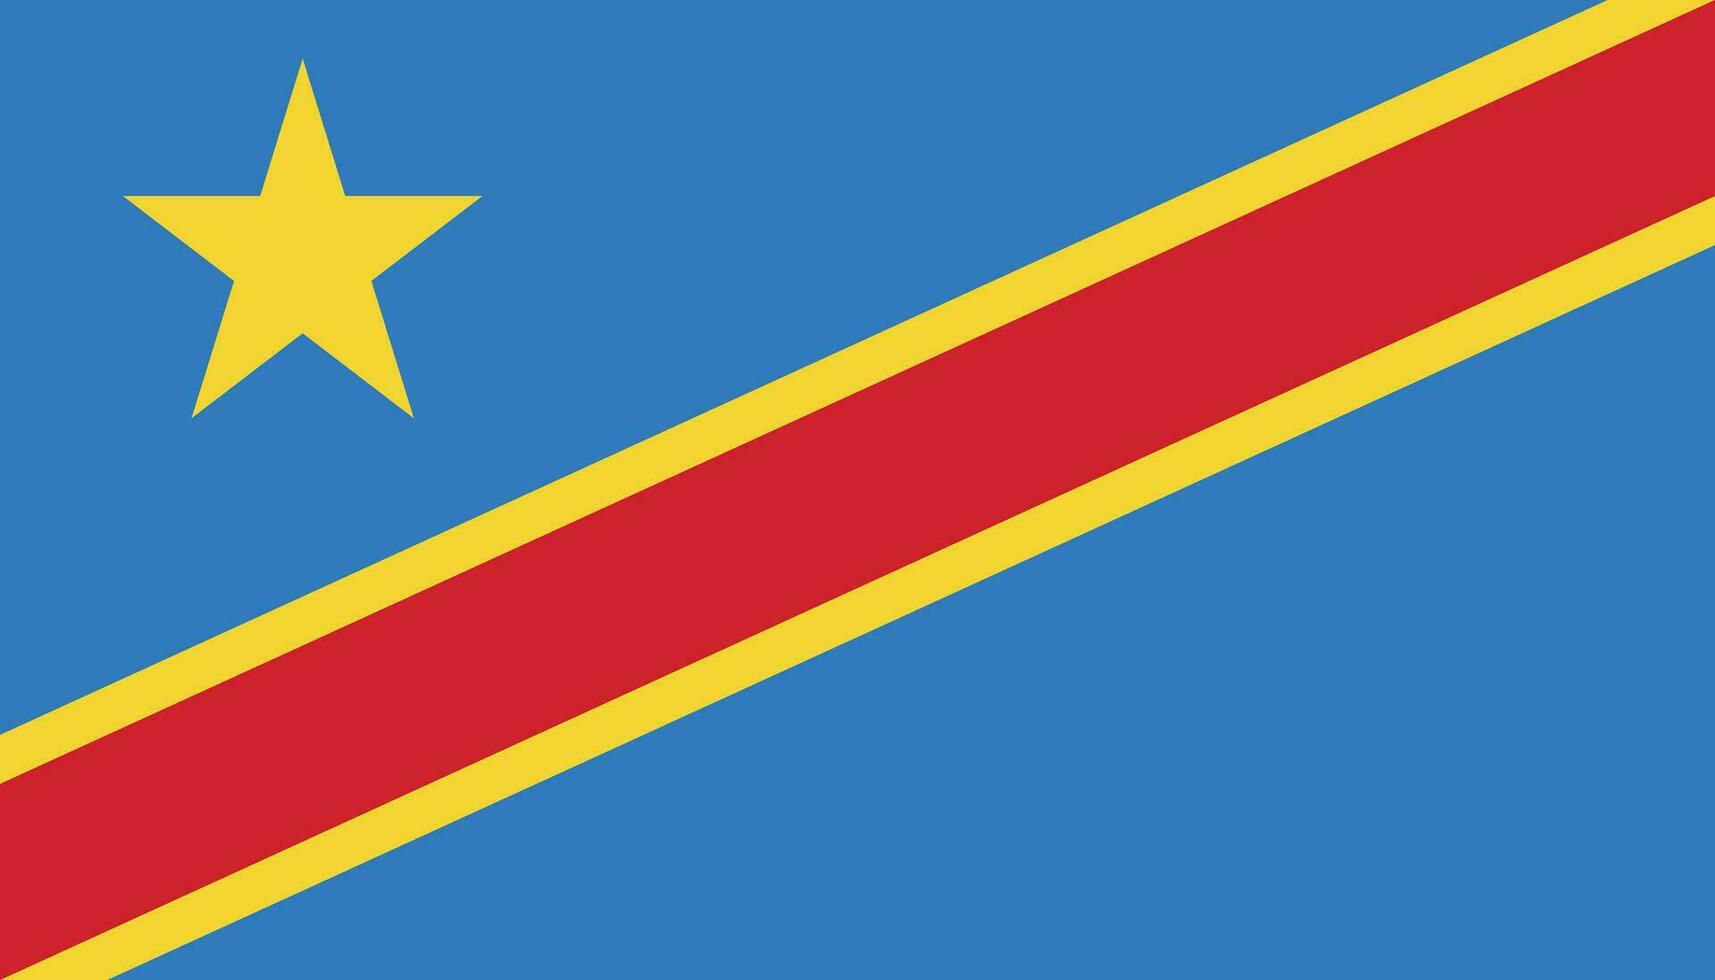 Democratic Republic of the Congo flag icon in flat style. National sign vector illustration. Politic business concept.